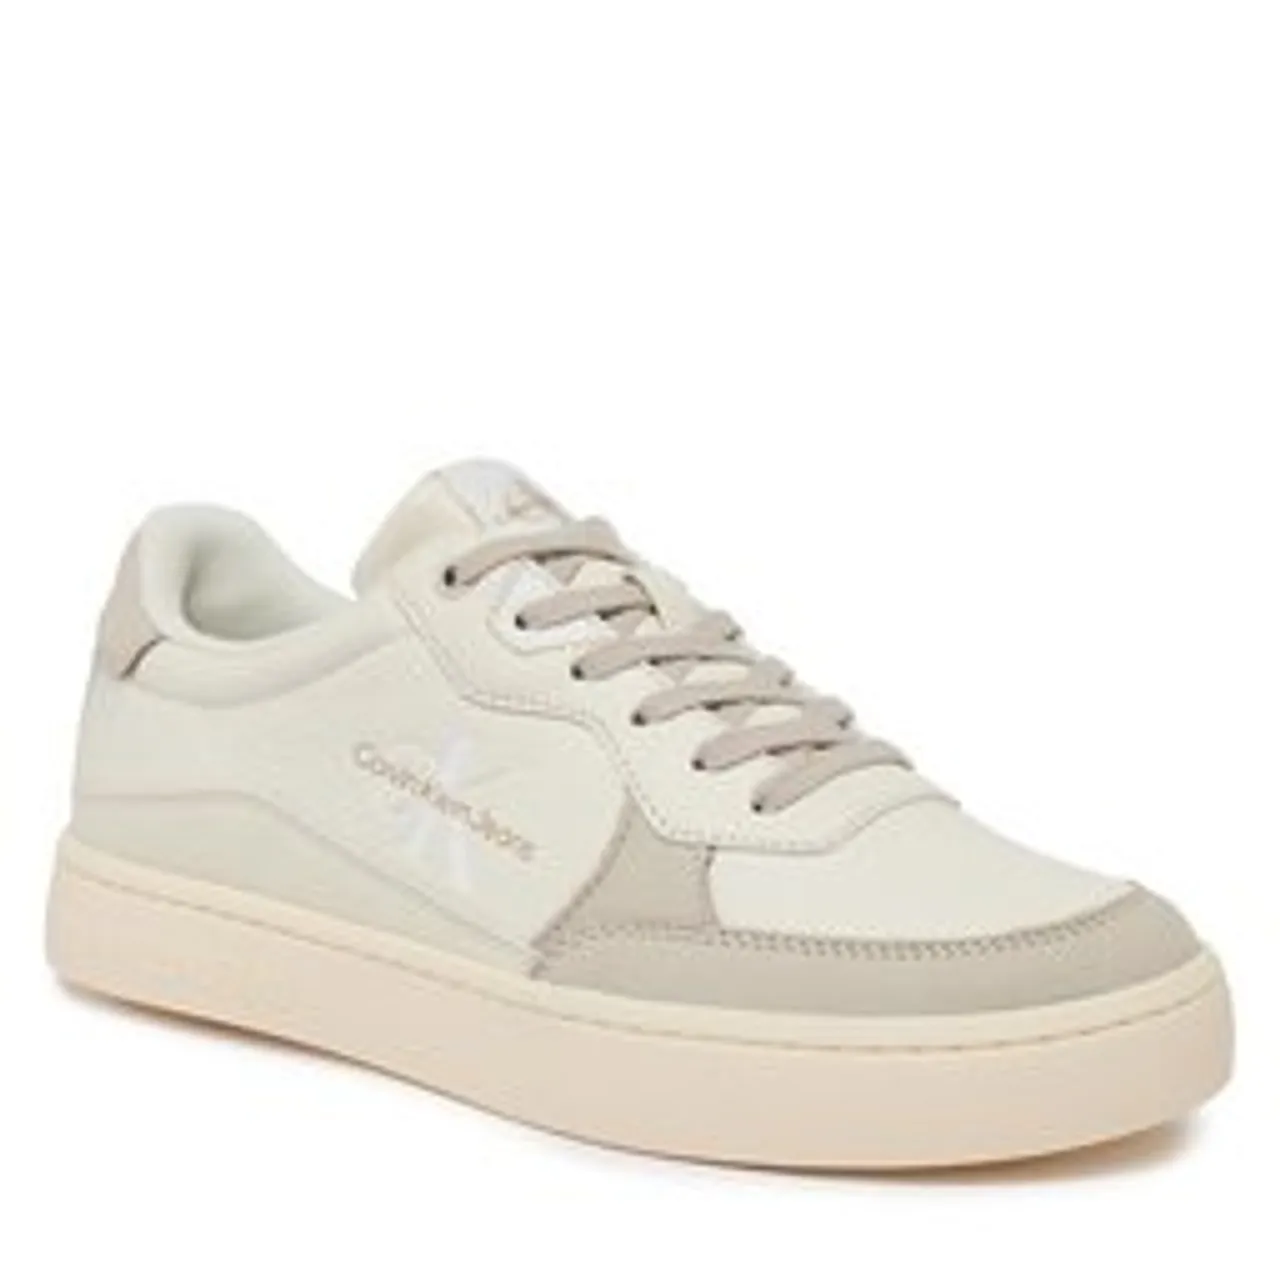 Sneakers Calvin Klein Jeans Classic Cupsole Low Lth Ml Fad YM0YM00885 Creamy White/Eggshell 0GF